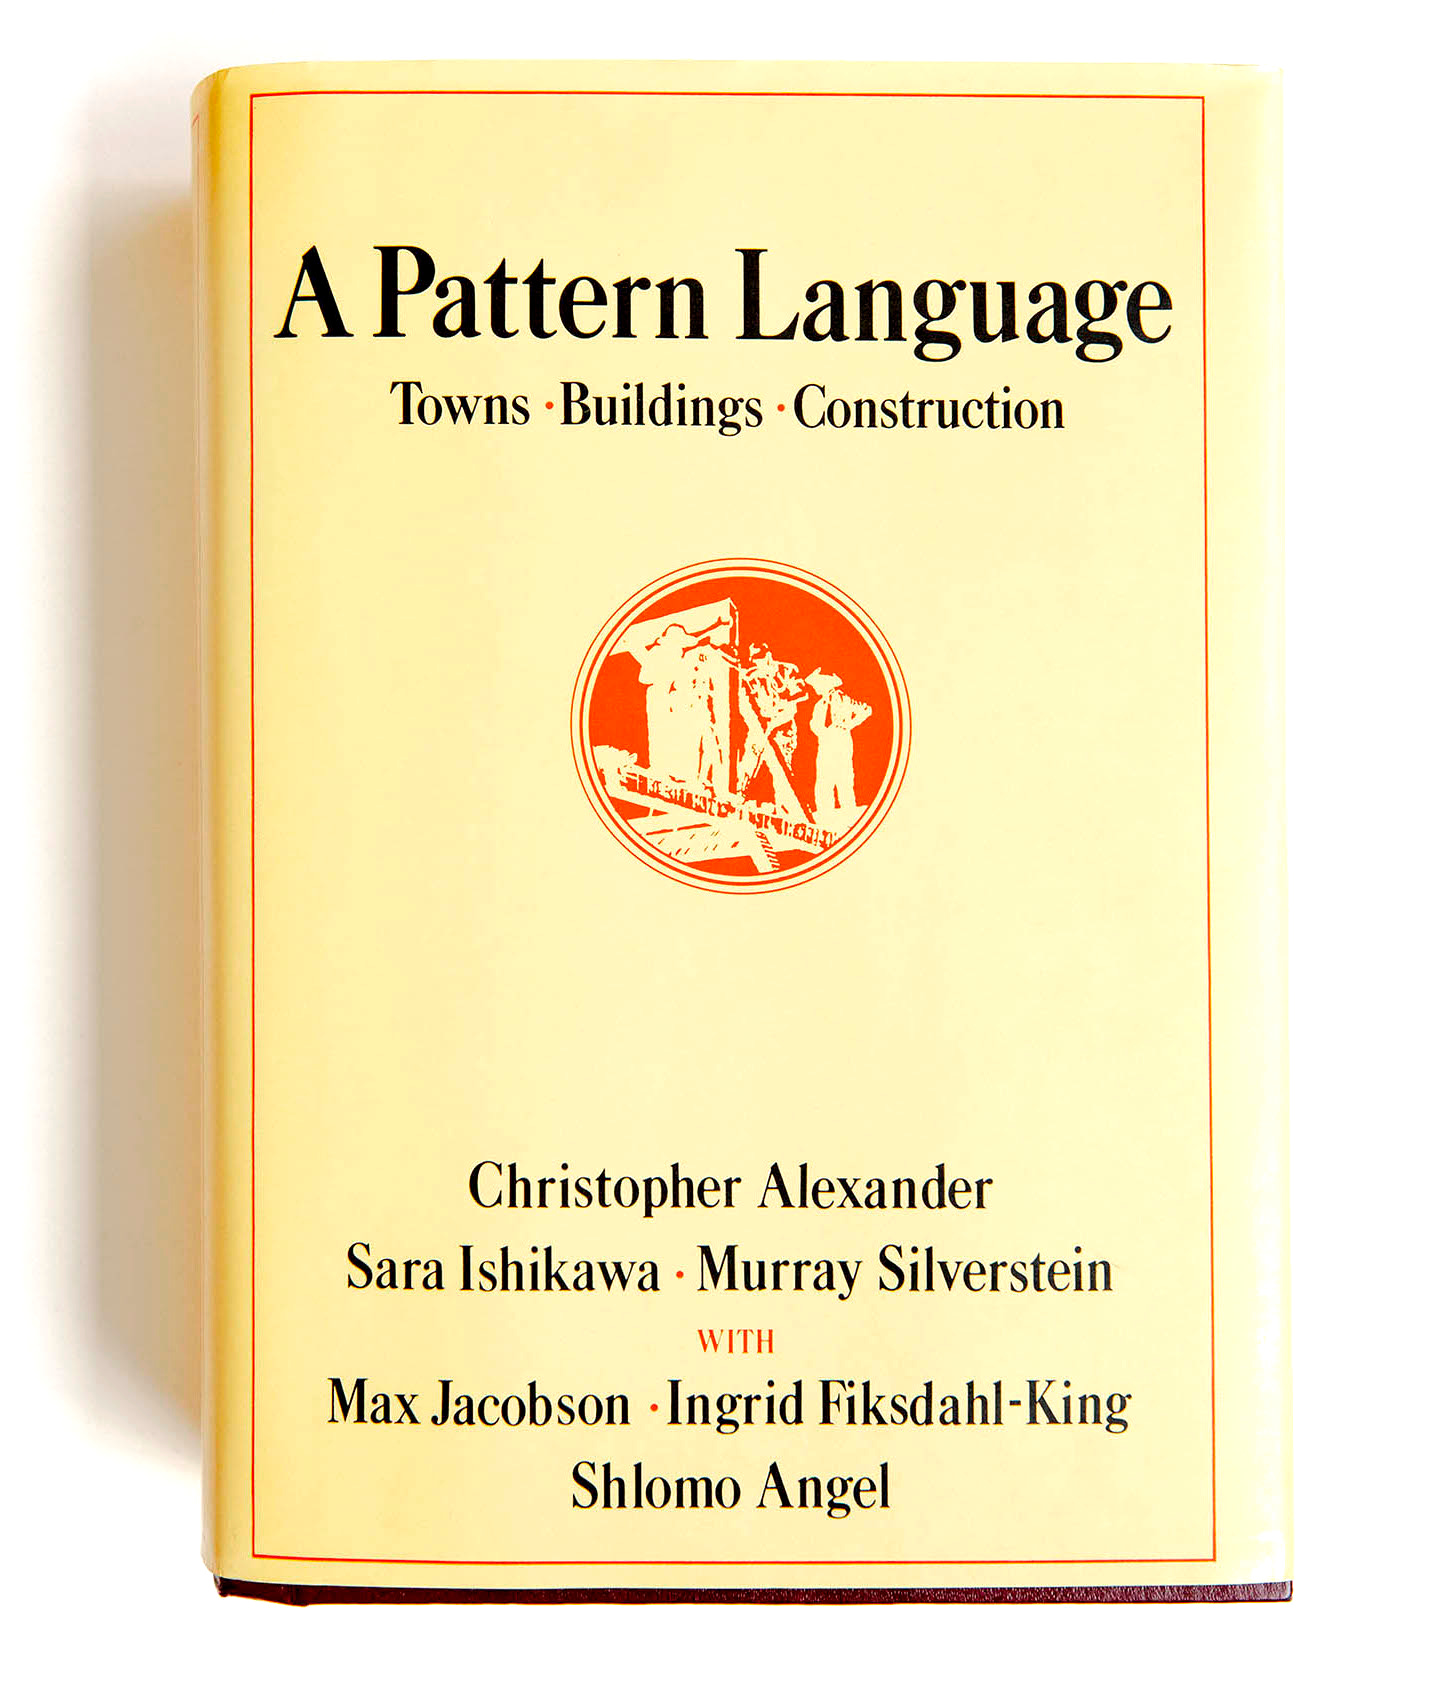 A photo of the hardcover book, “A Pattern Language.” It has a yellow cover with a little orange seal in the middle, but I can’t quite tell what it’s depicting.